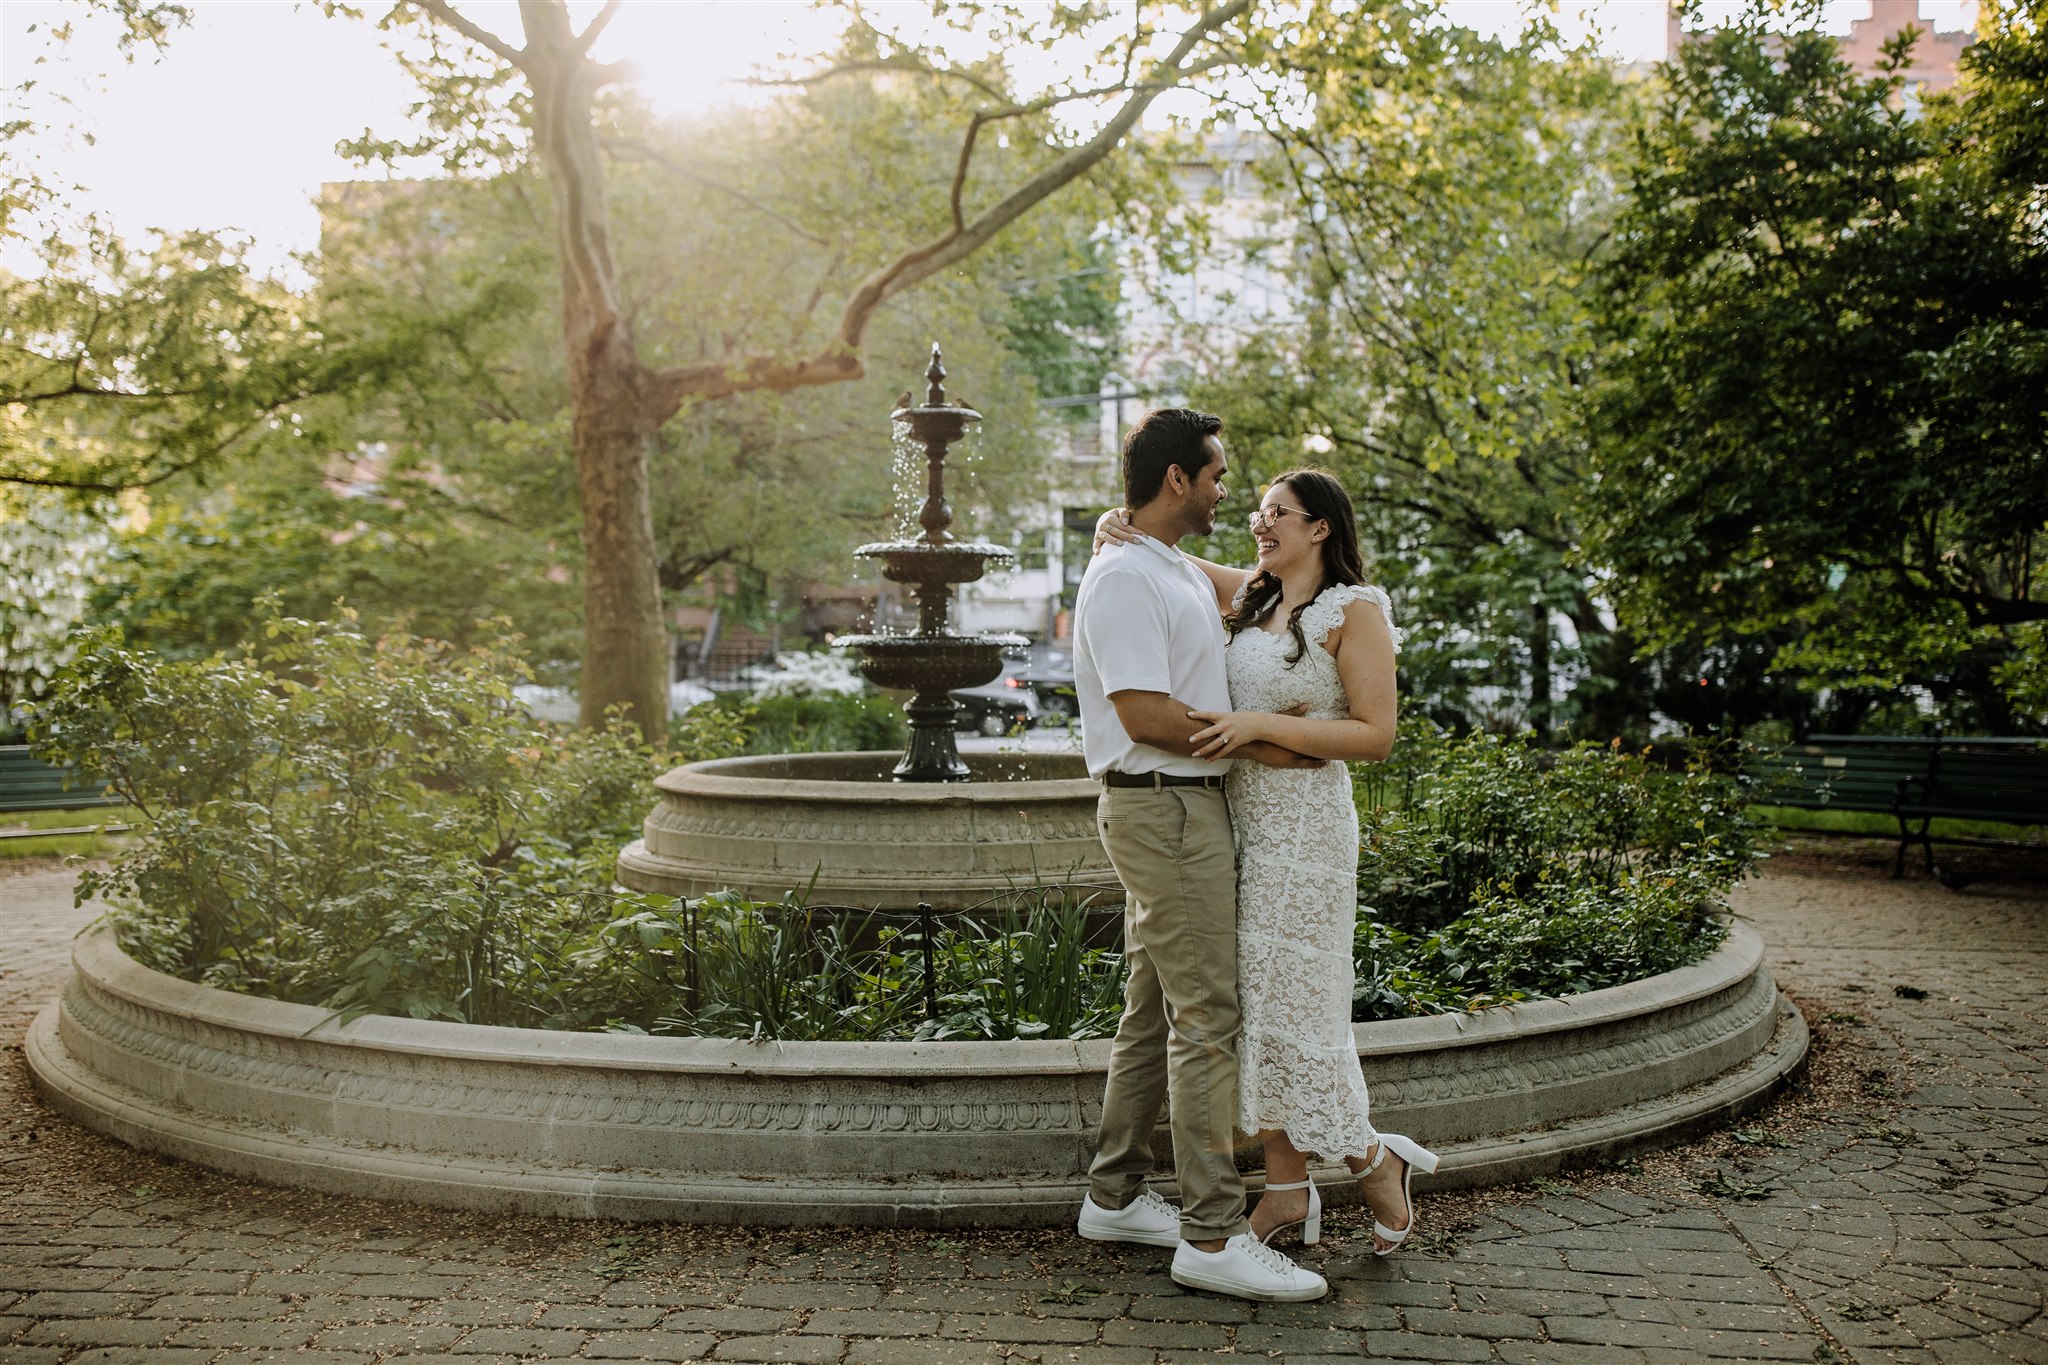 Man and woman holding each other in front of a fountain in Van Vorst Park in Jersey City, NJ.